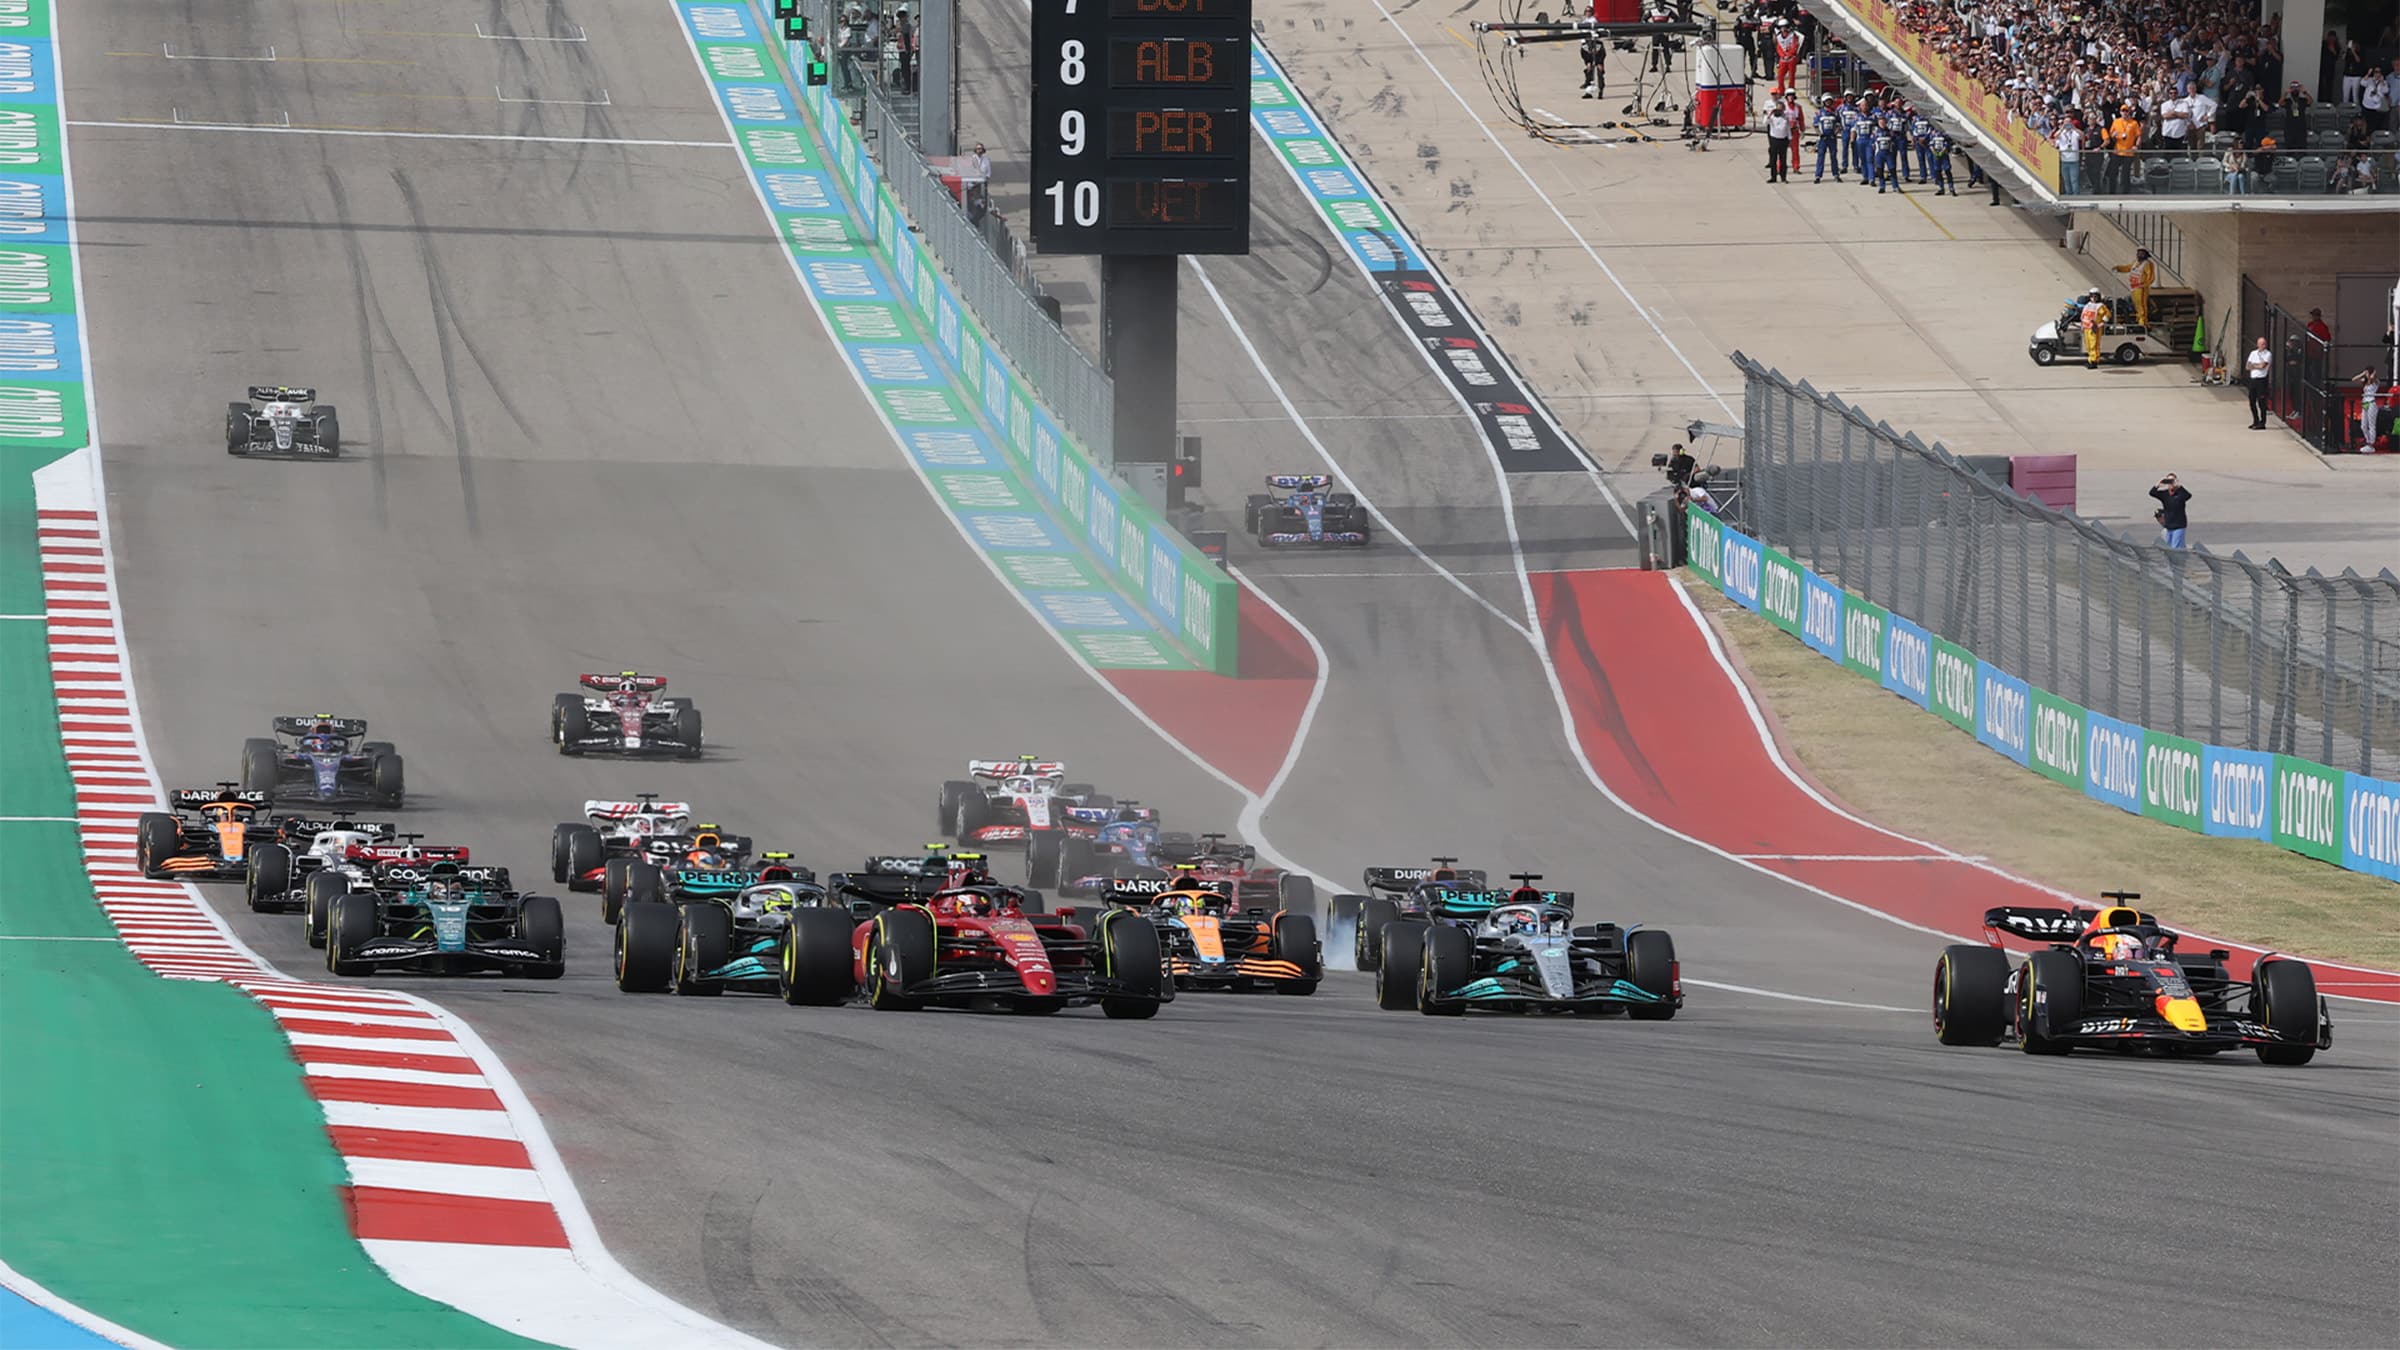 F1 World Championship points after the 2023 United States Grand Prix